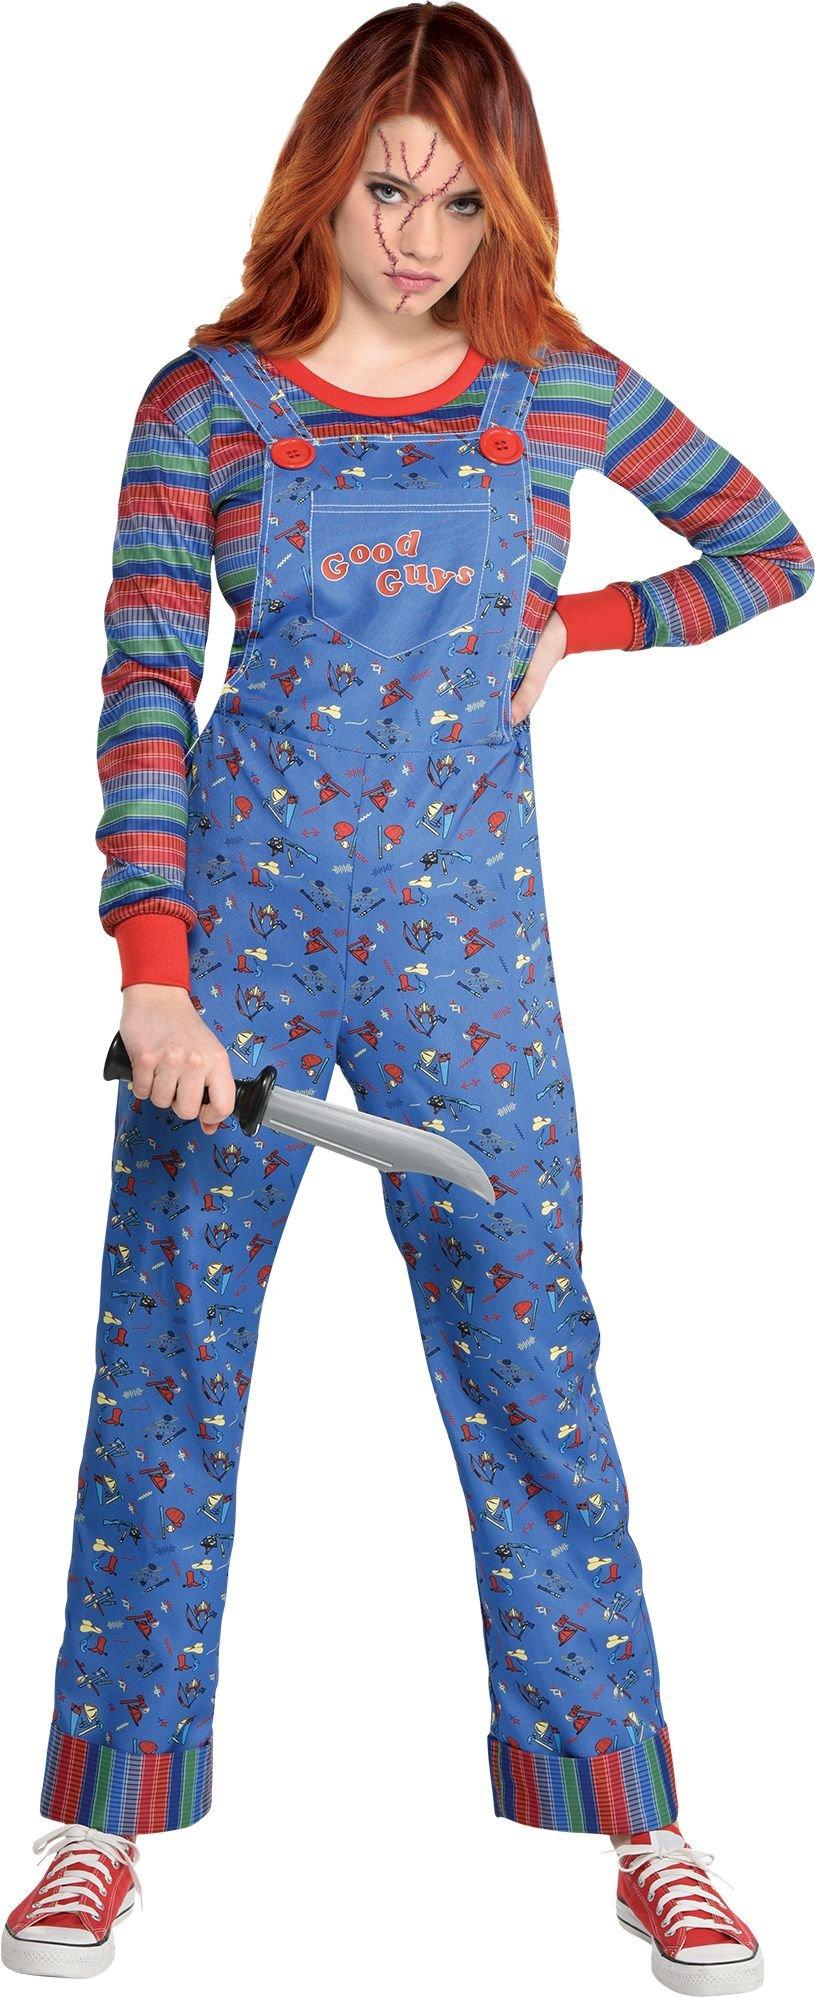 Chucky Costume for Women - Child's Play